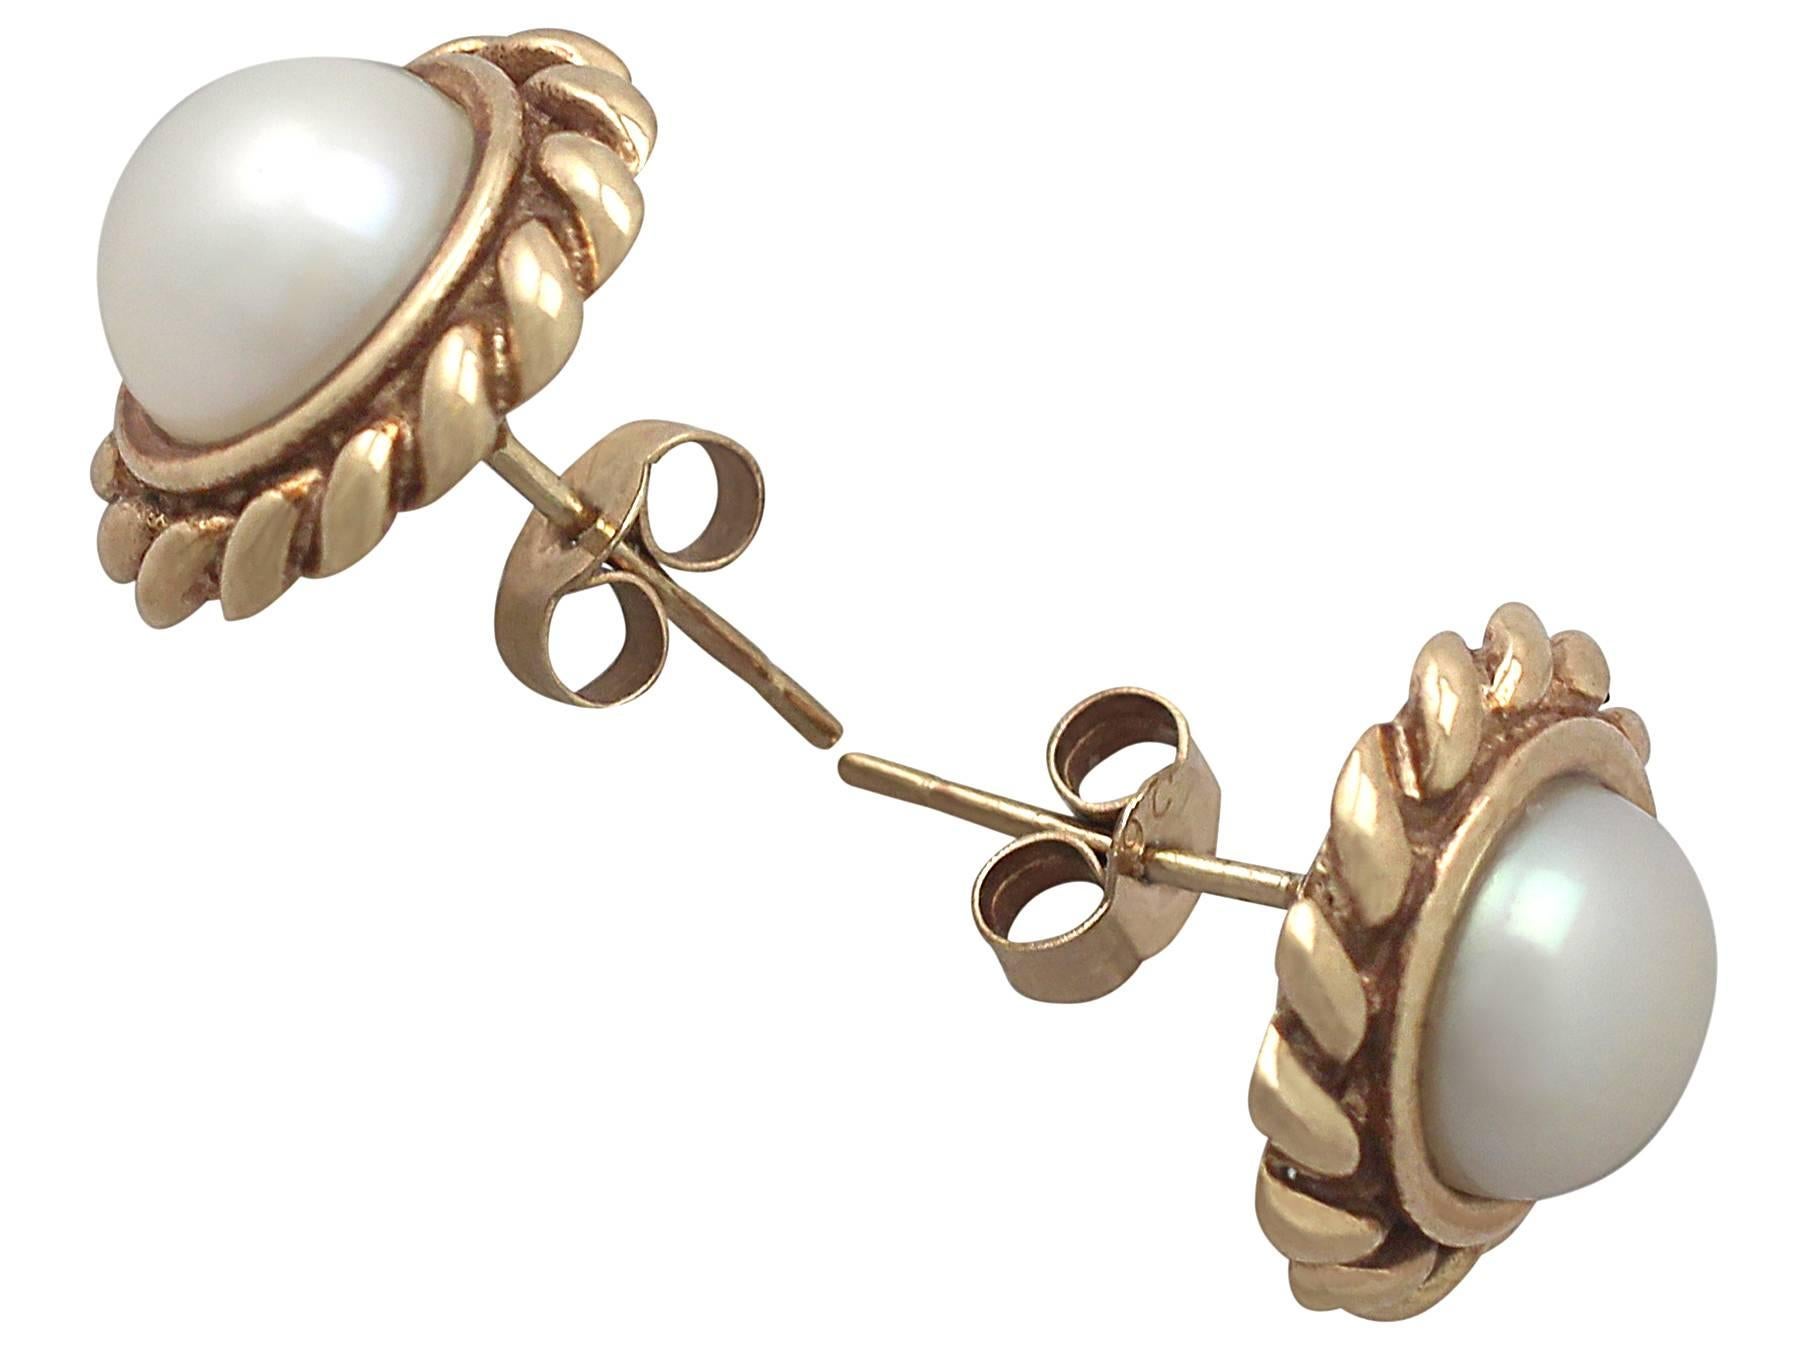 A fine and impressive pair of large vintage pearl and 9 karat yellow gold stud earrings; part of our vintage jewelry and estate jewelry collections

This fine and impressive pair of large pearl stud earrings have been crafted in 9k yellow